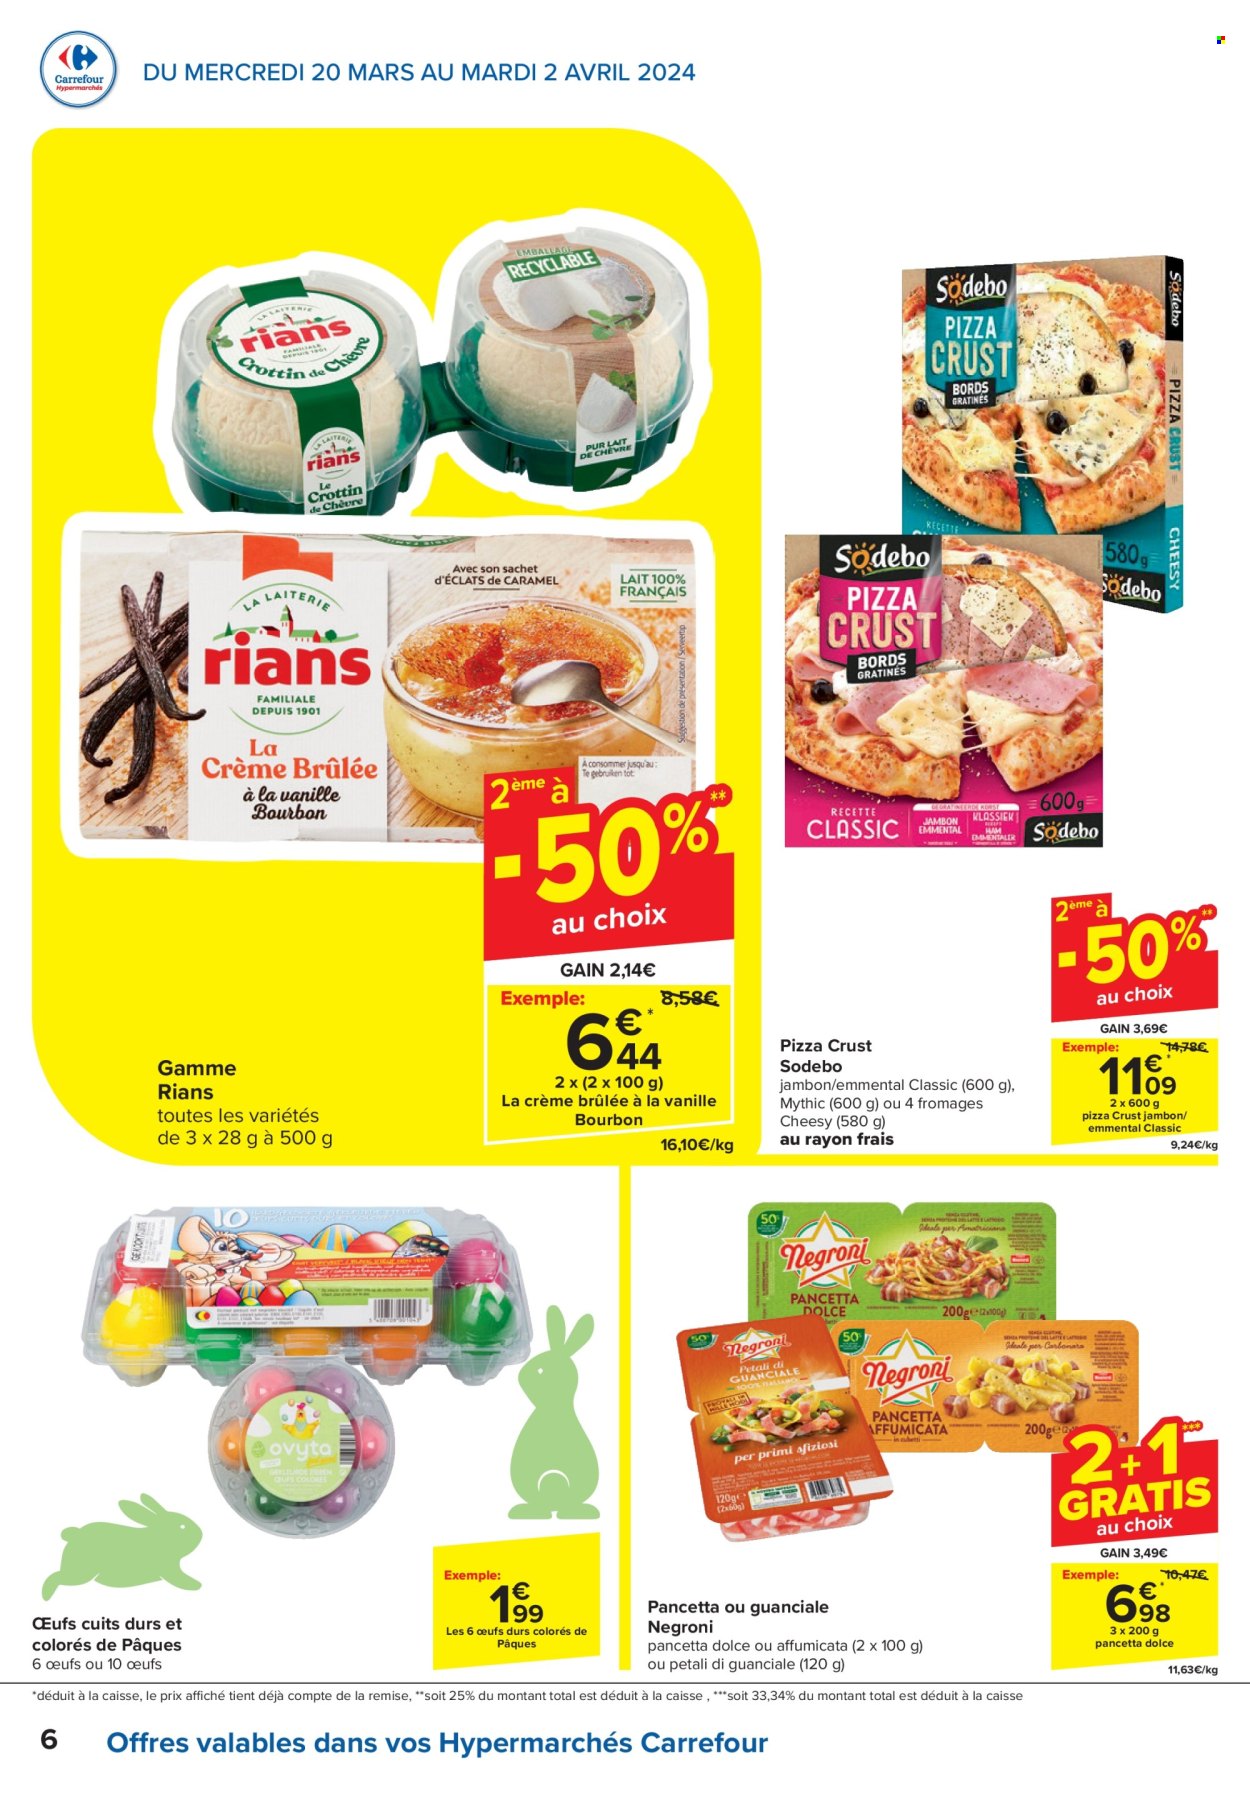 Catalogue Carrefour hypermarkt - 20.3.2024 - 2.4.2024. Page 6.